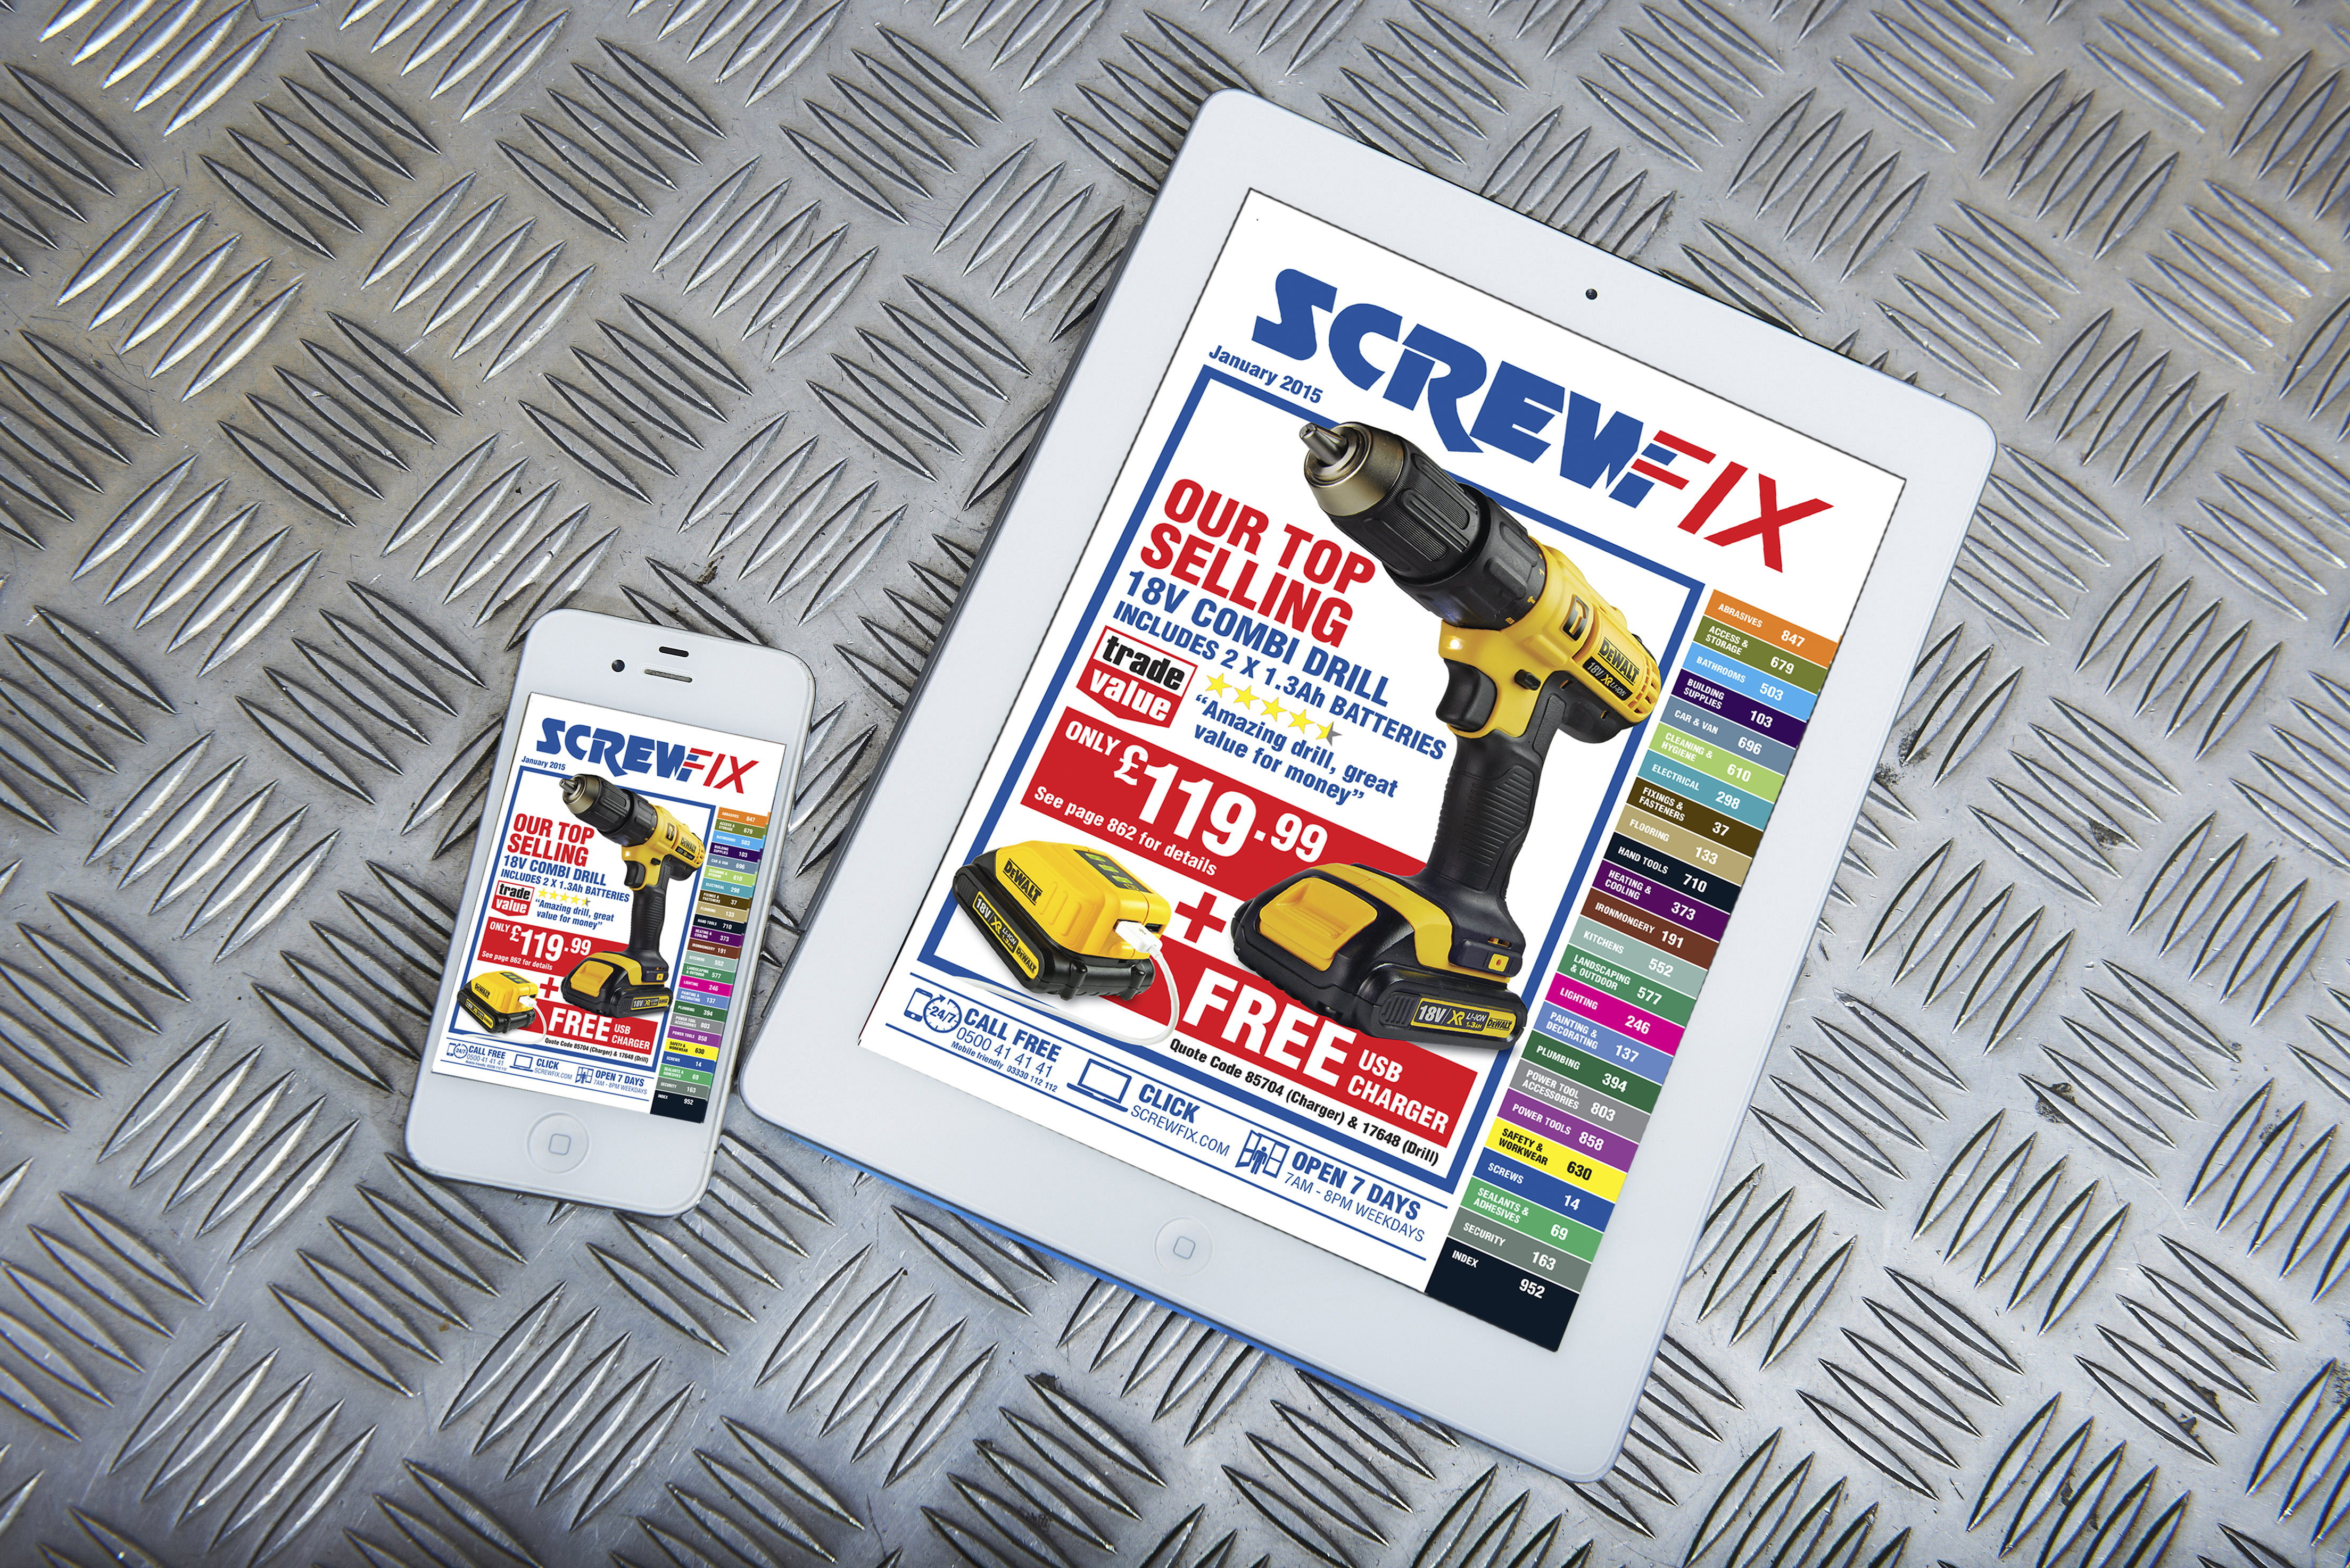 Exclusive new products from Screwfix